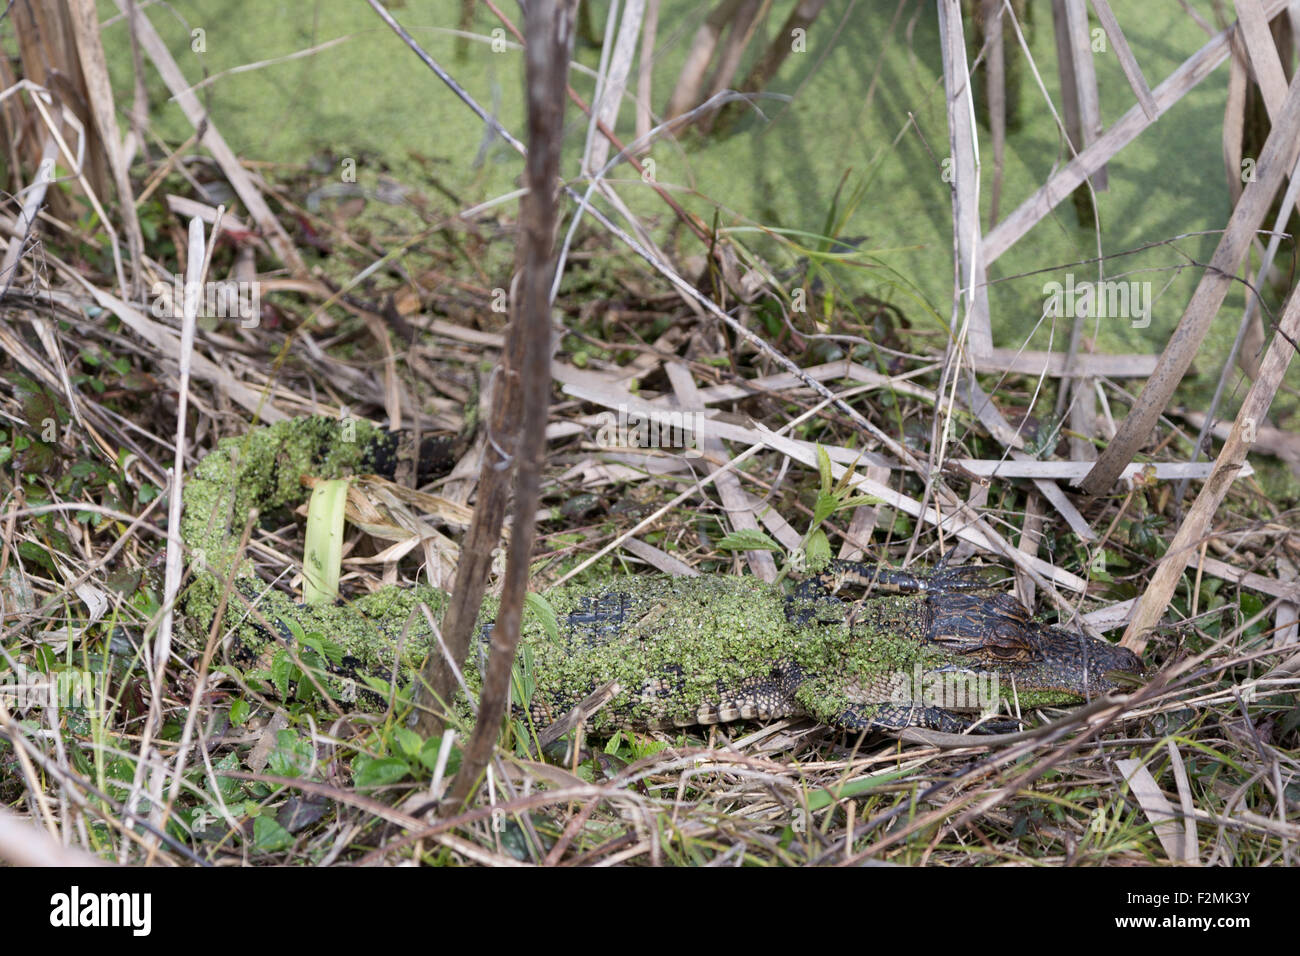 A photograph of a juvenile alligator in the wild near Savannah in Georgia. The alligator is covered in algae. Stock Photo